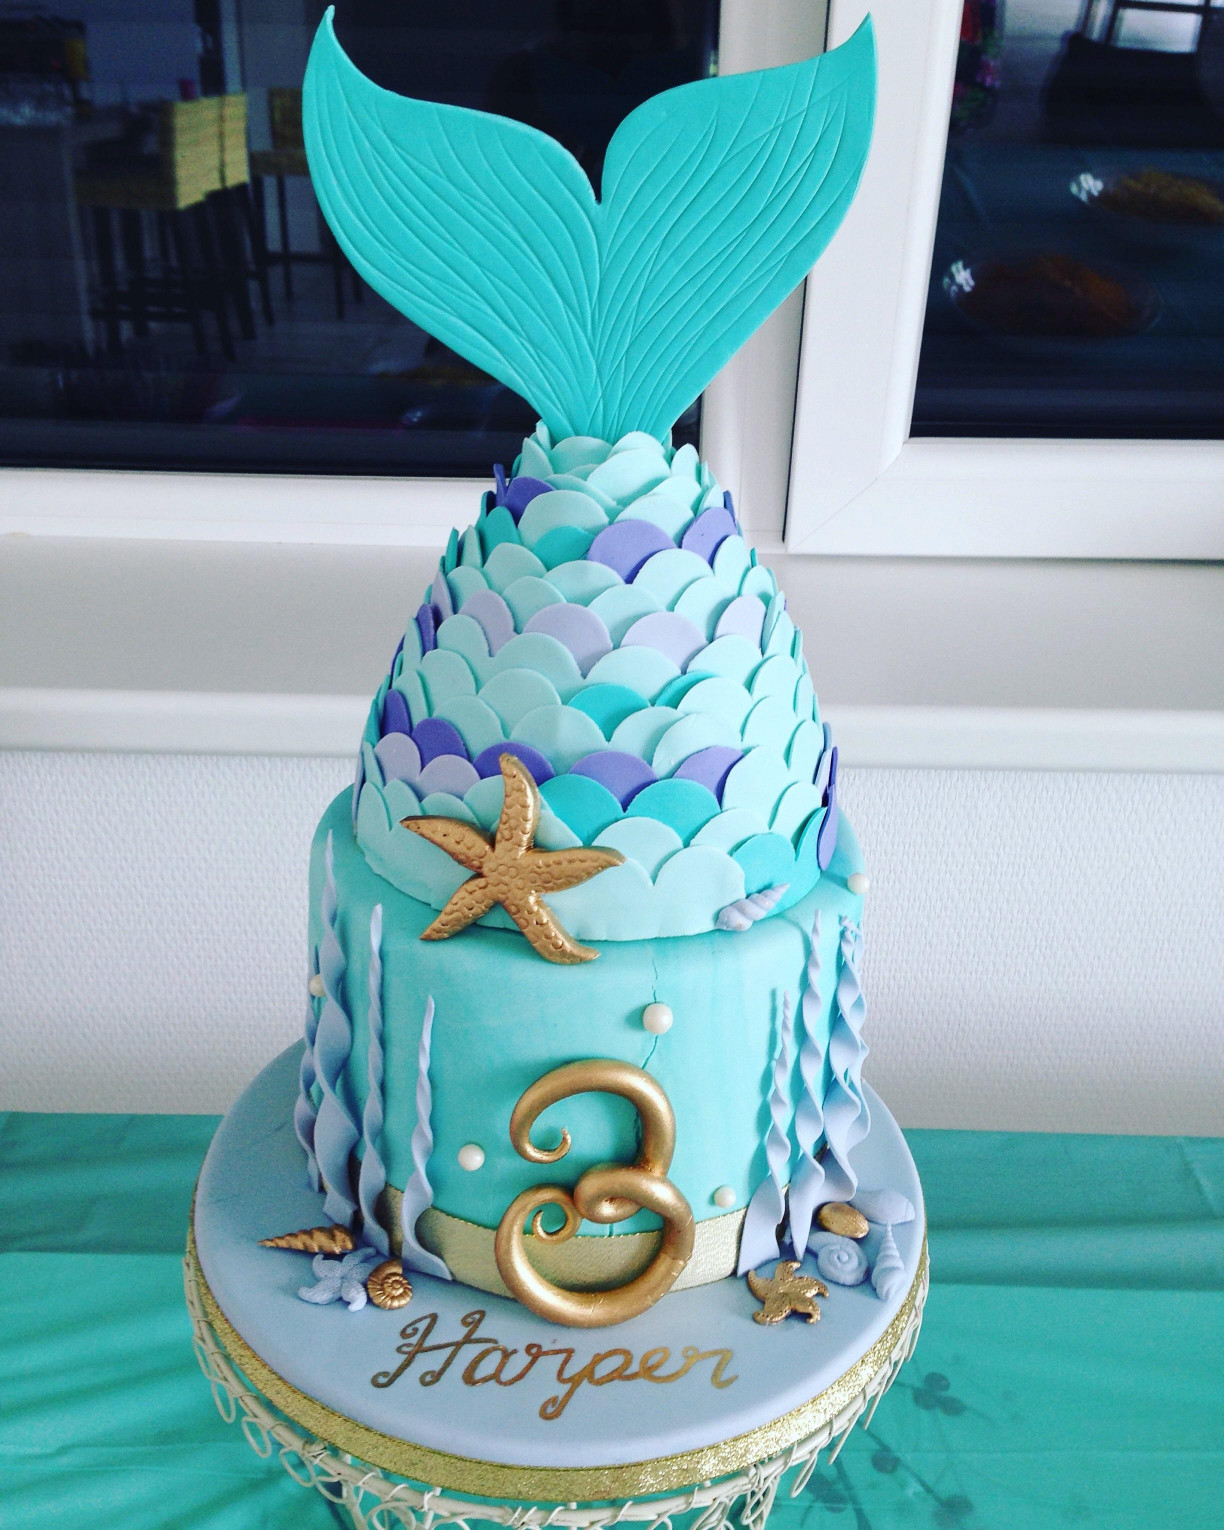 Mermaid Birthday Cake
 Mermaid birthday cake I made for my daughters 3rd birthday